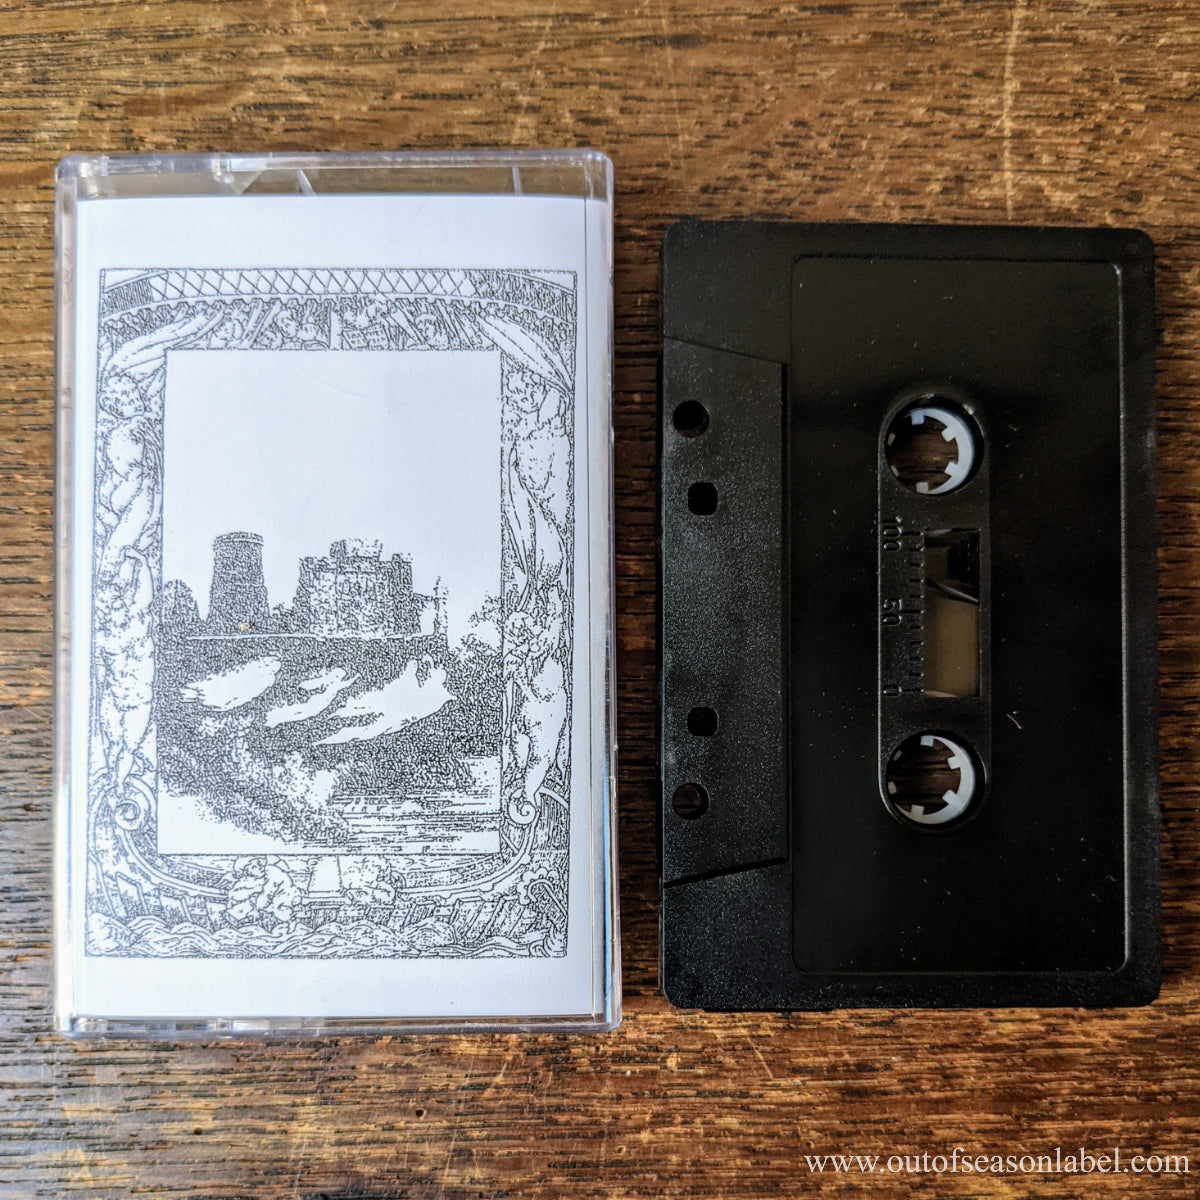 [SOLD OUT] FAUSE KNICHT "Demo II" Cassette Tape